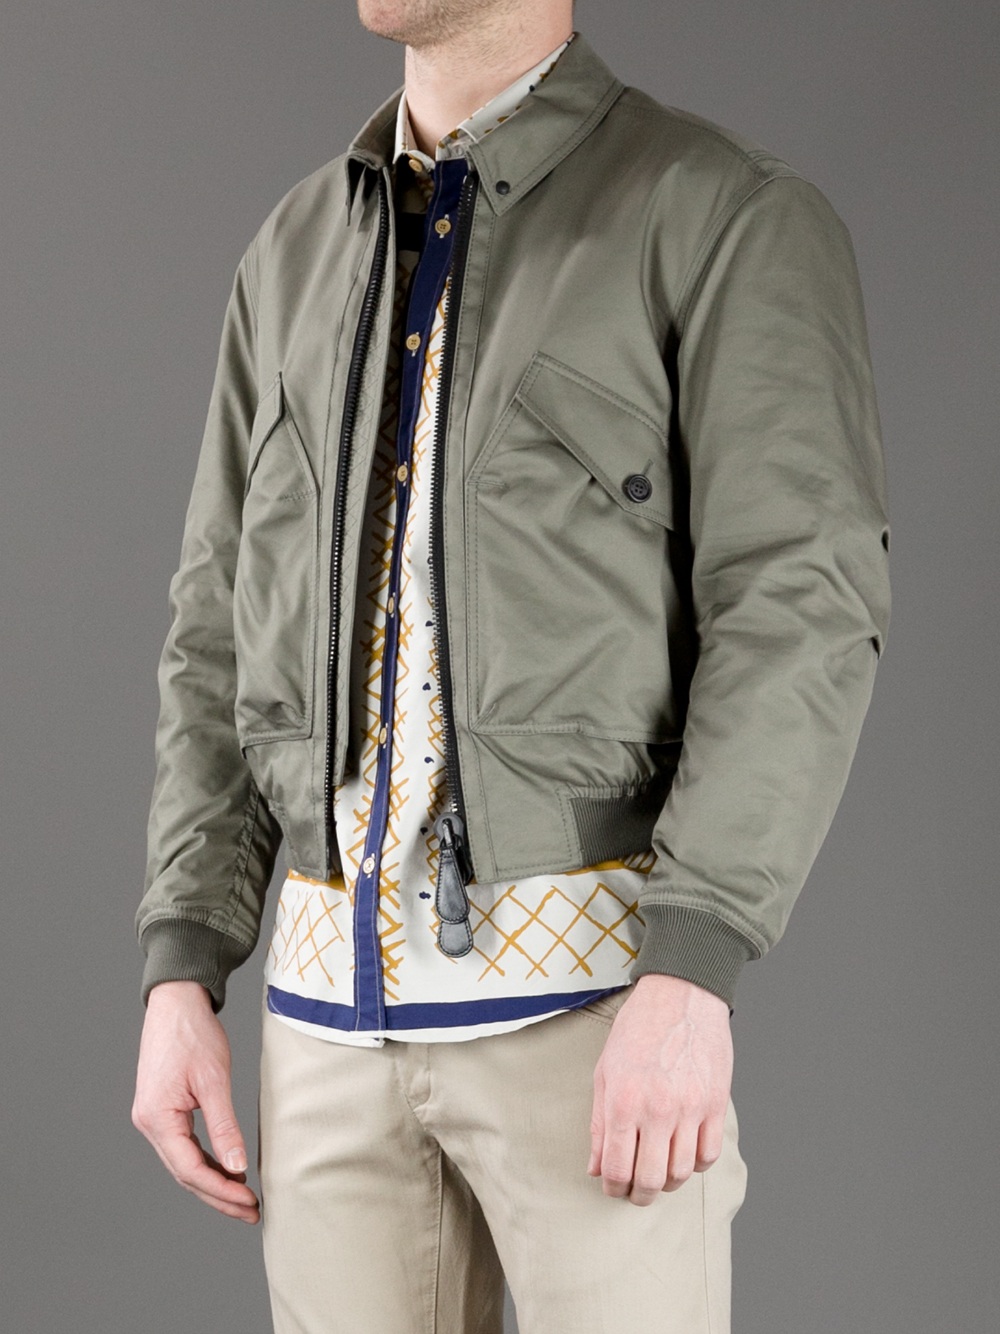 Burberry Prorsum Bomber Jacket in Olive (Natural) for Men - Lyst